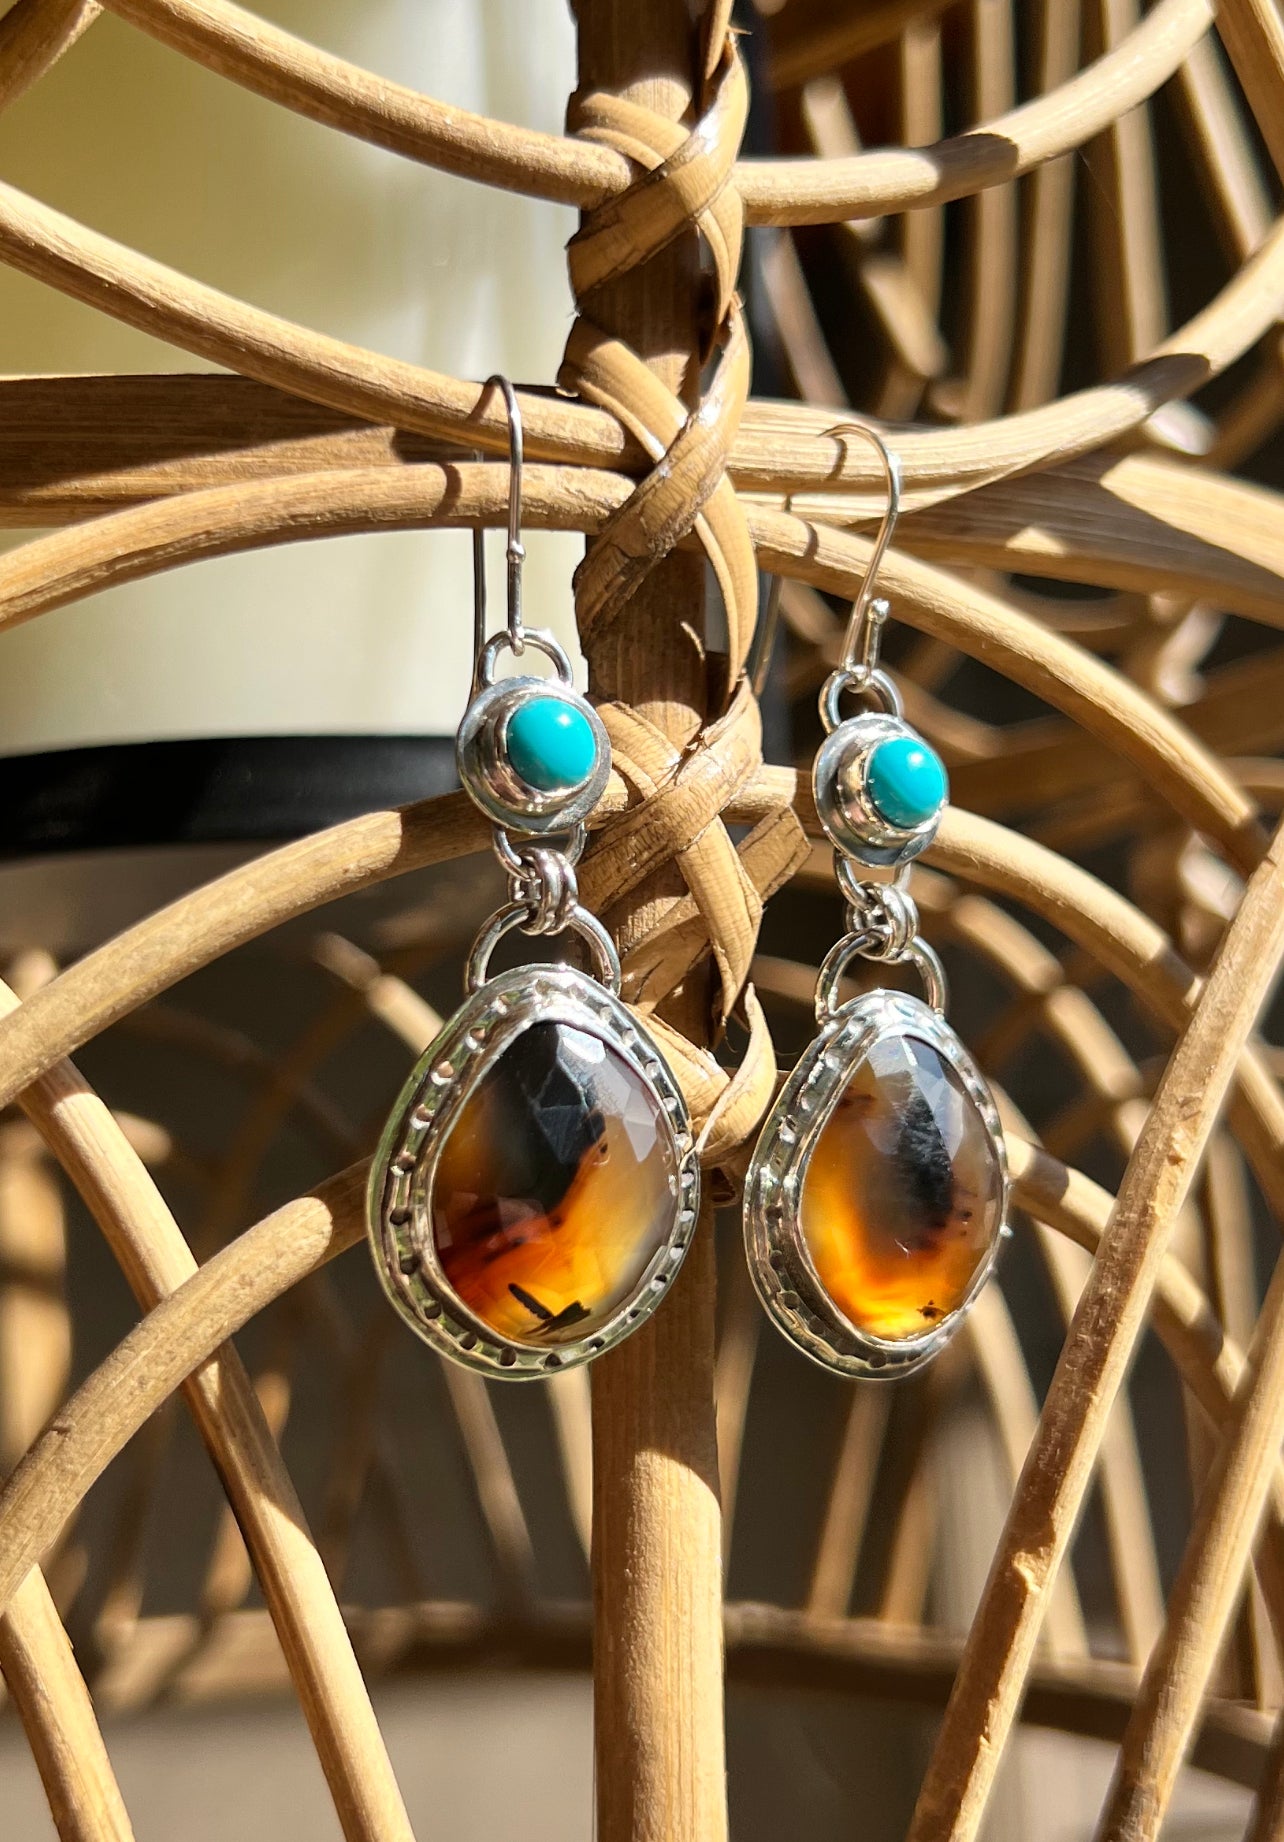 Montana Agate and Turquoise Sterling Silver Dangle Earrings